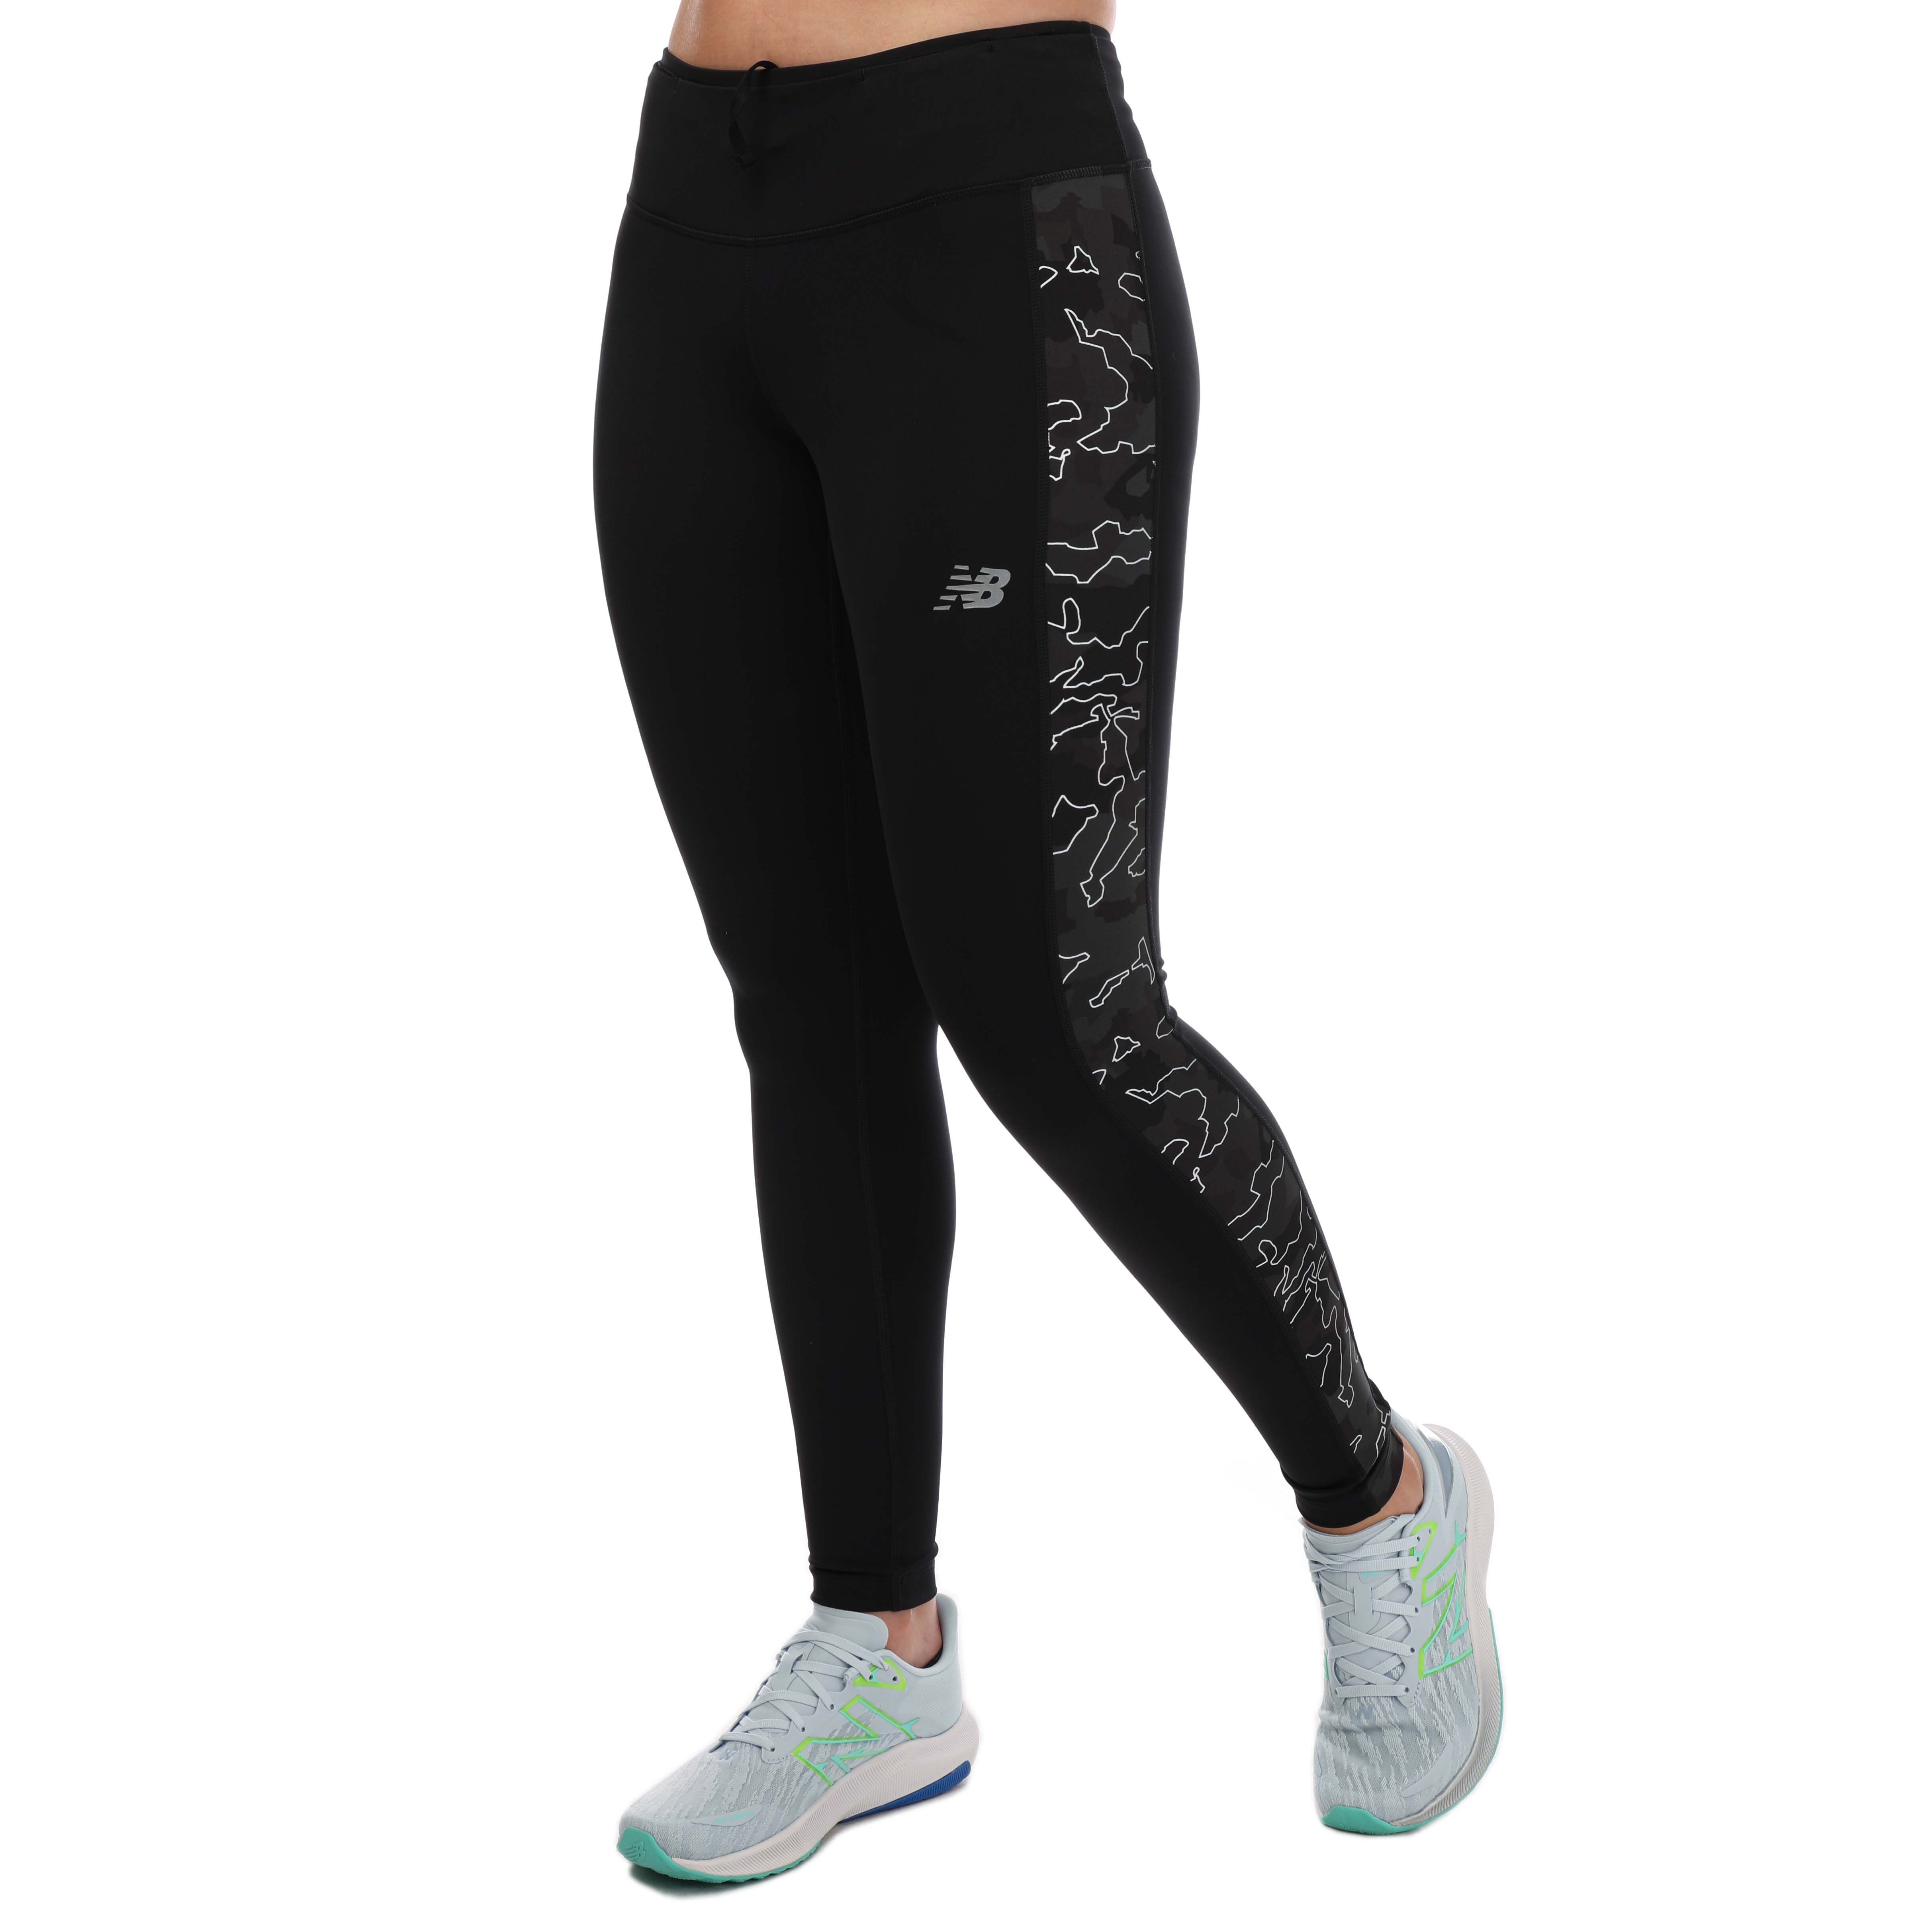 Womens Reflective Print Accelerate Tights